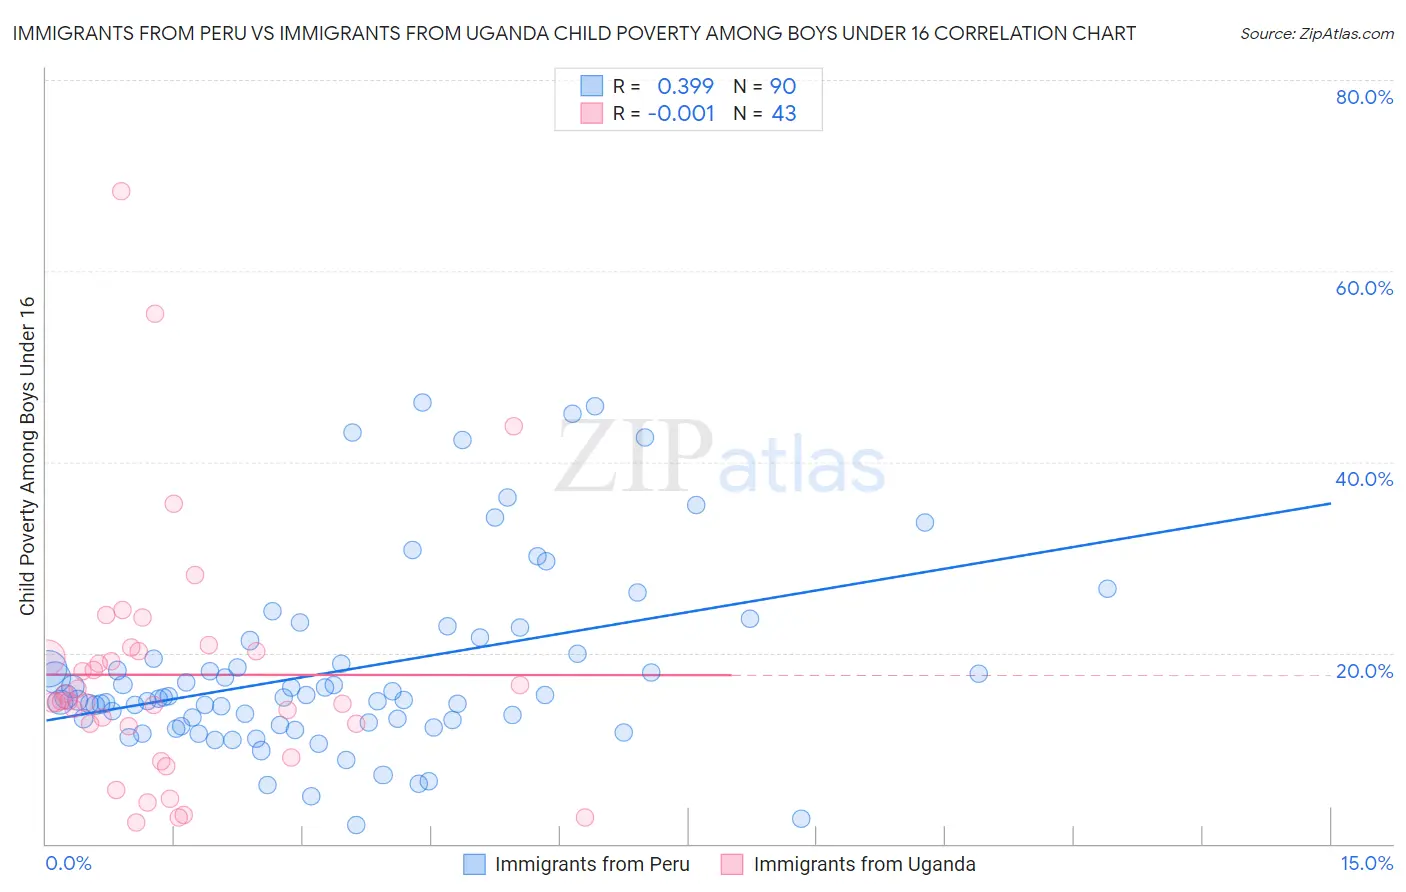 Immigrants from Peru vs Immigrants from Uganda Child Poverty Among Boys Under 16